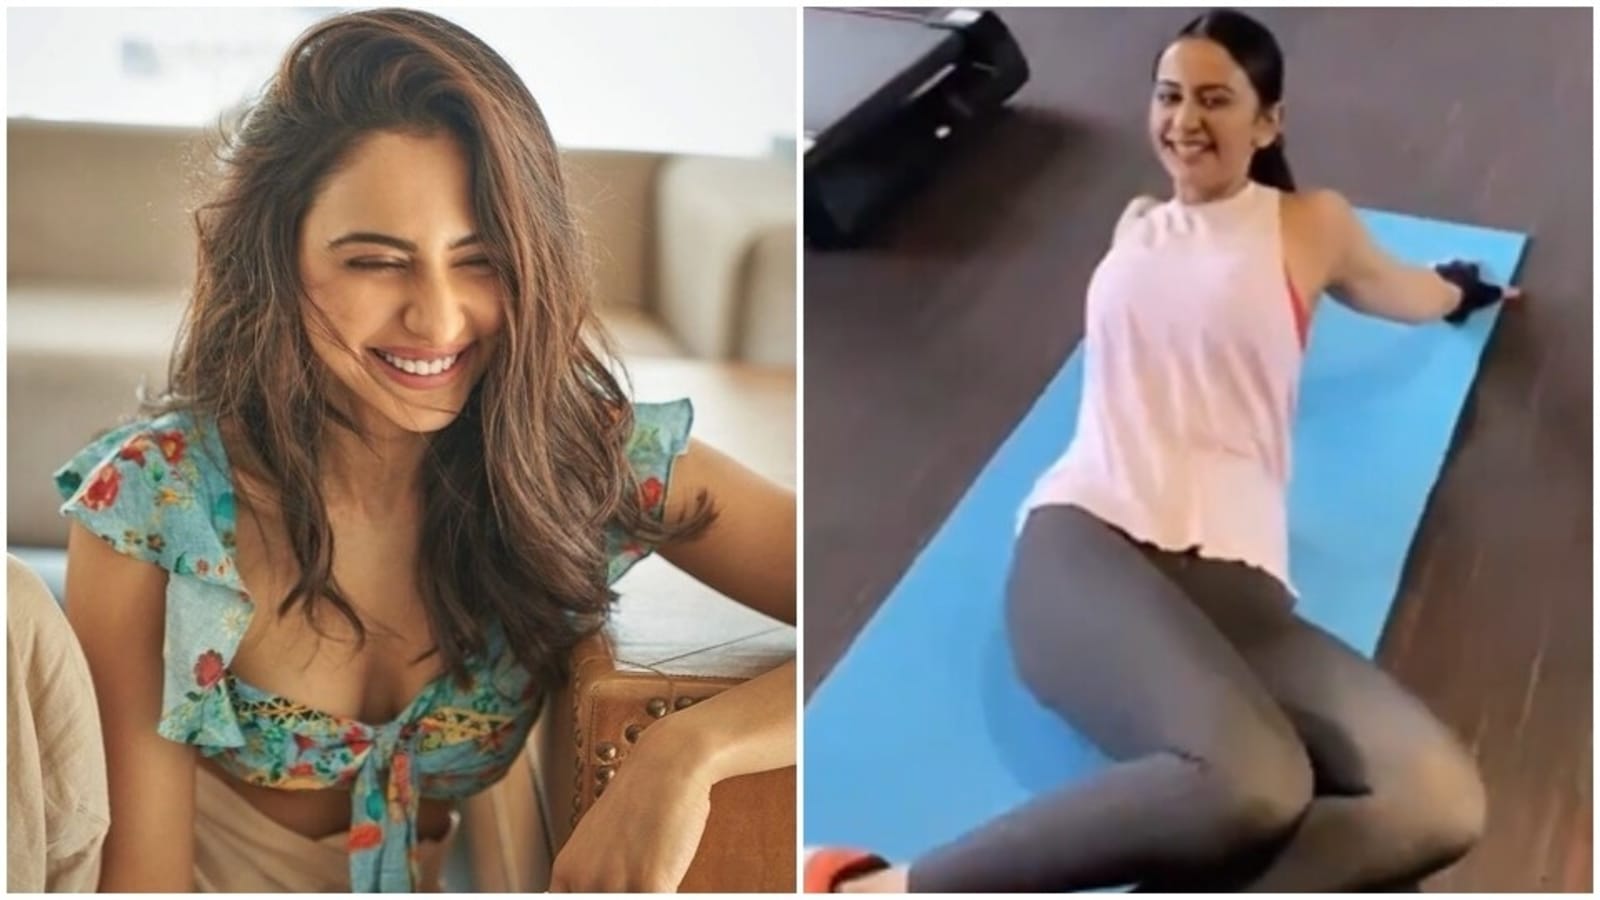 Preet Singh Xxx - Rakul Preet Singh works out with her team in new video, inspires fans to  hit the gym | Health - Hindustan Times